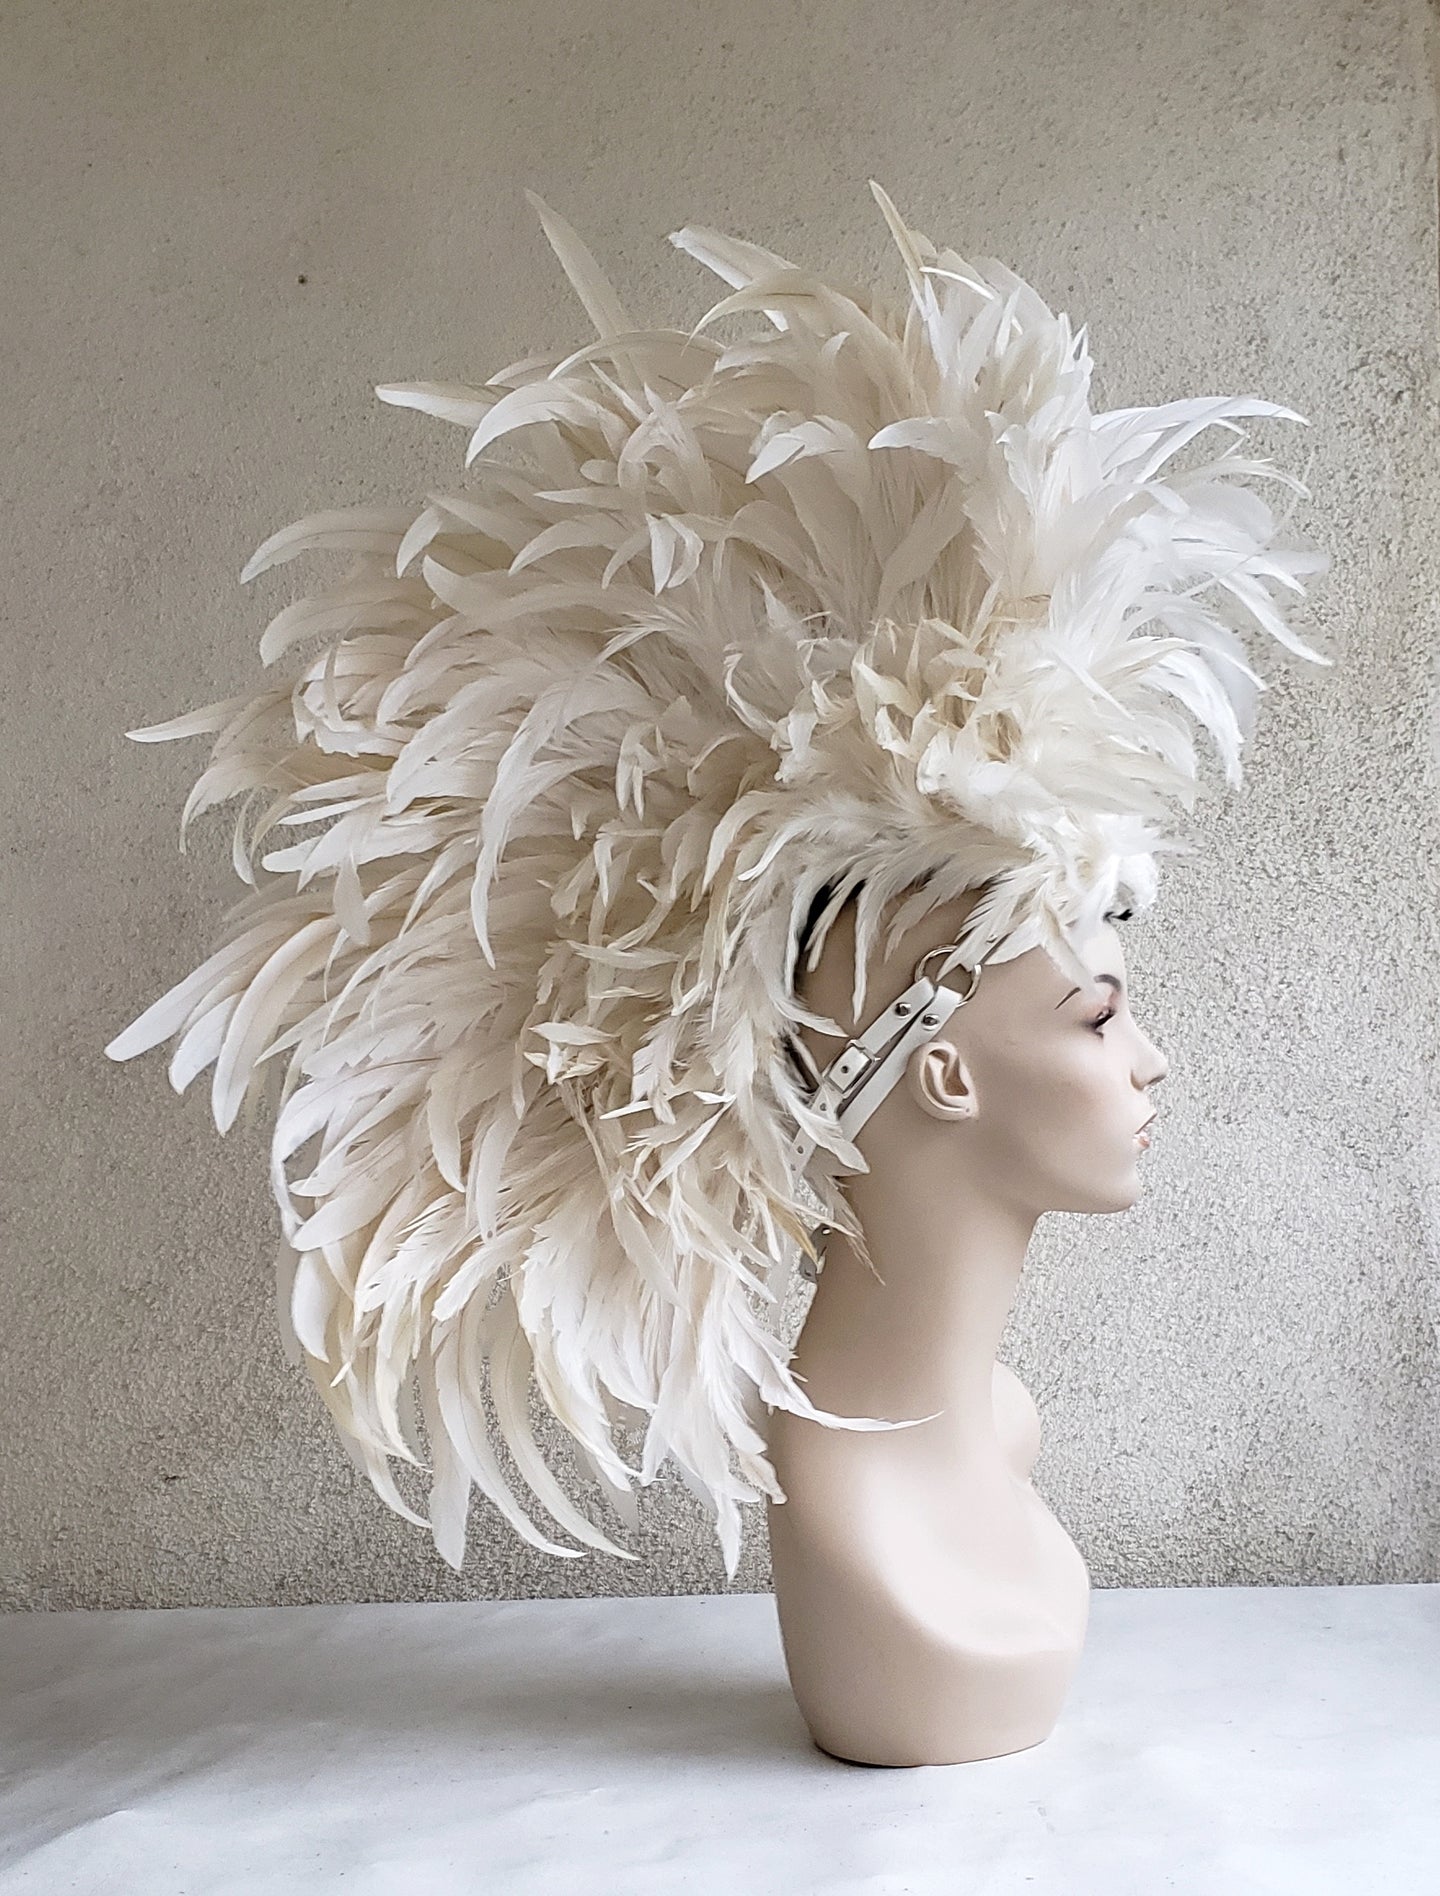 White Feather Mohawk Headdress- Made to Order